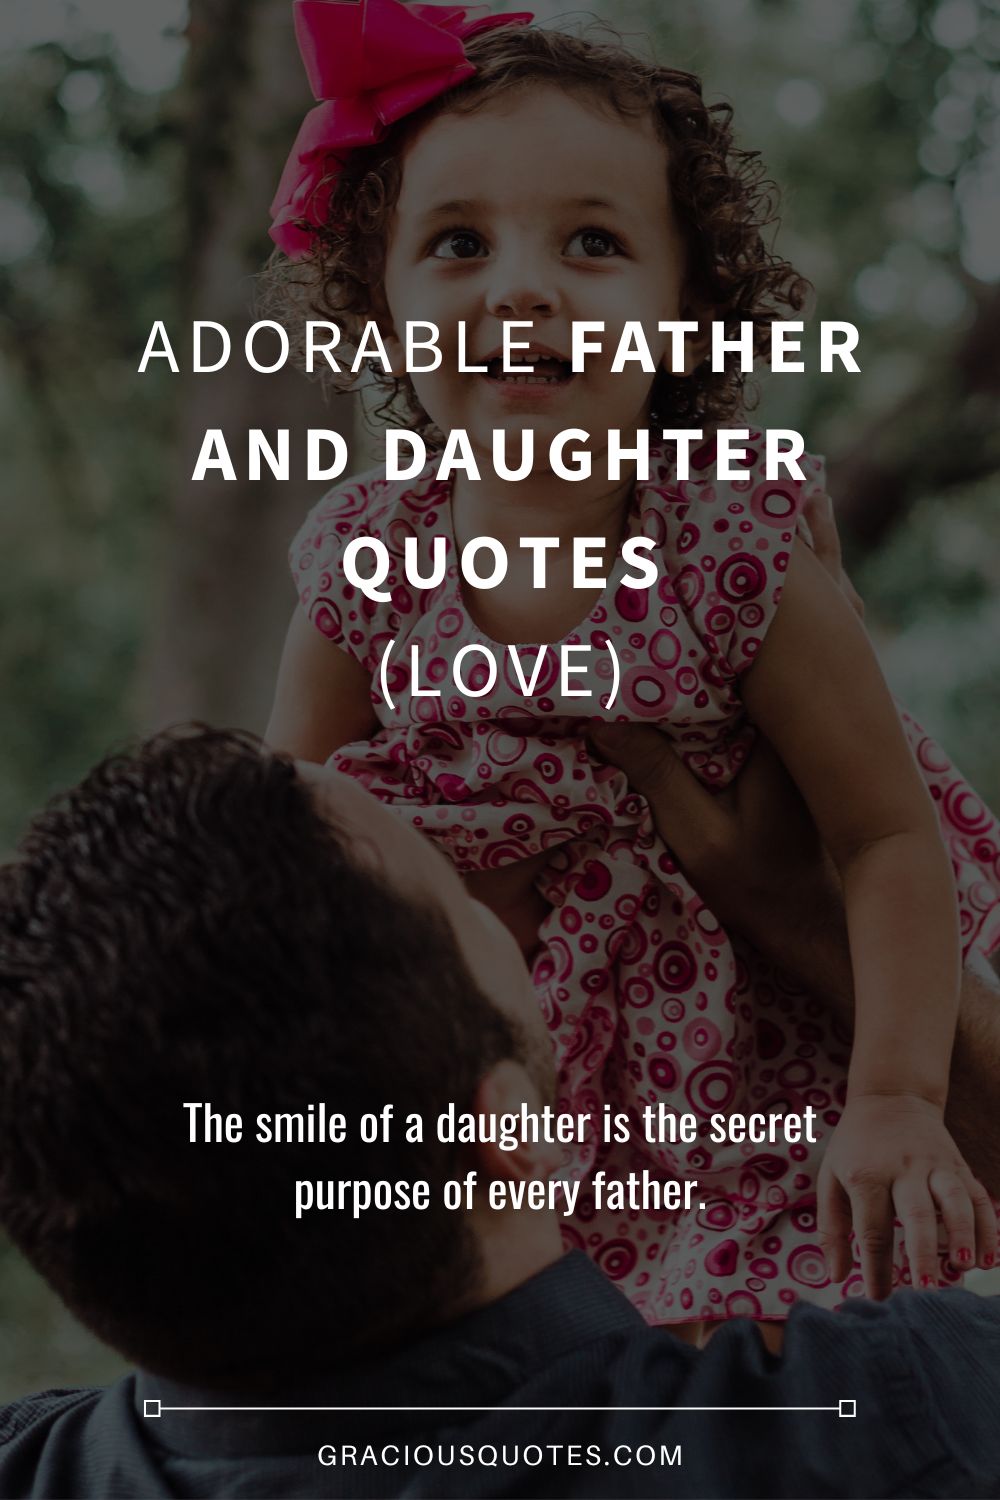 82 Adorable Father and Daughter Quotes (LOVE)